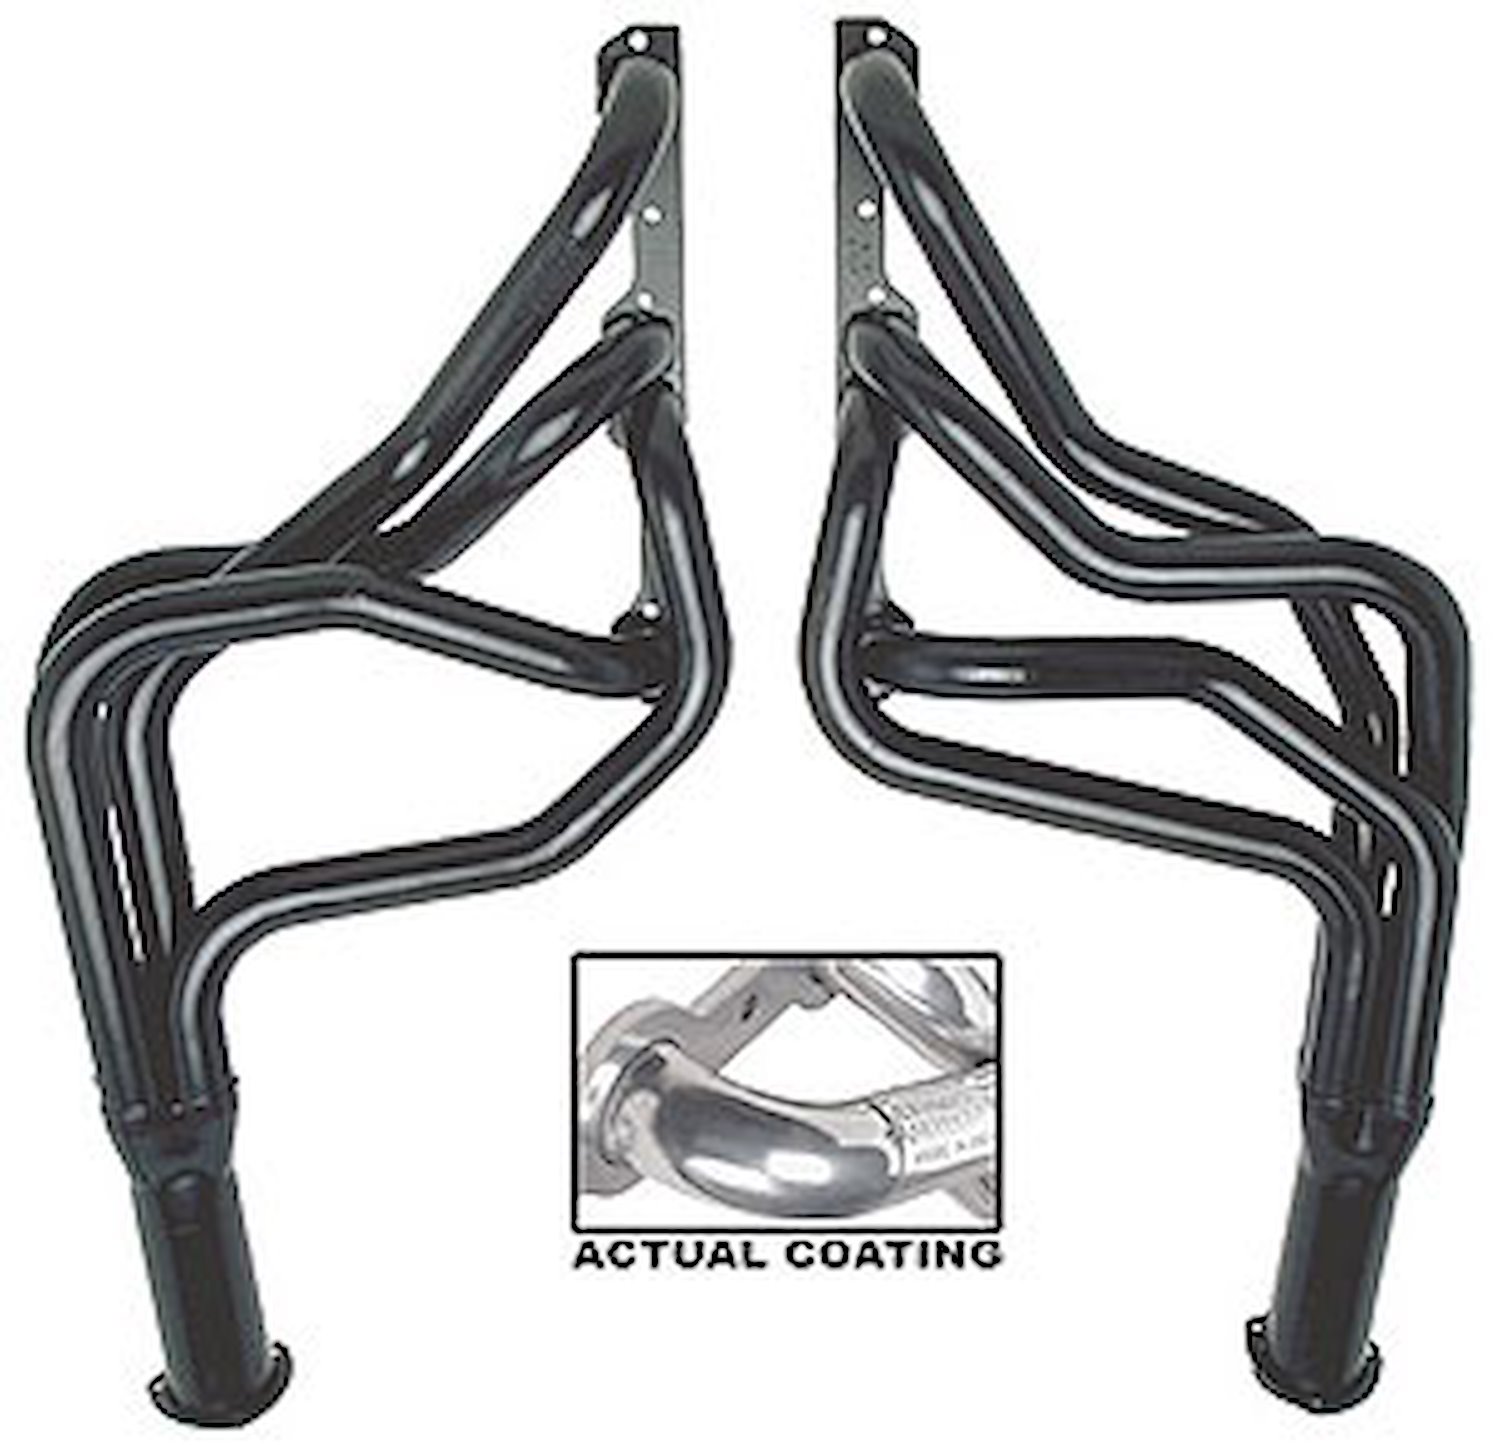 Standard Duty HTC Coated Full-Length Headers 1964-73 Chevy Chevelle 283-400